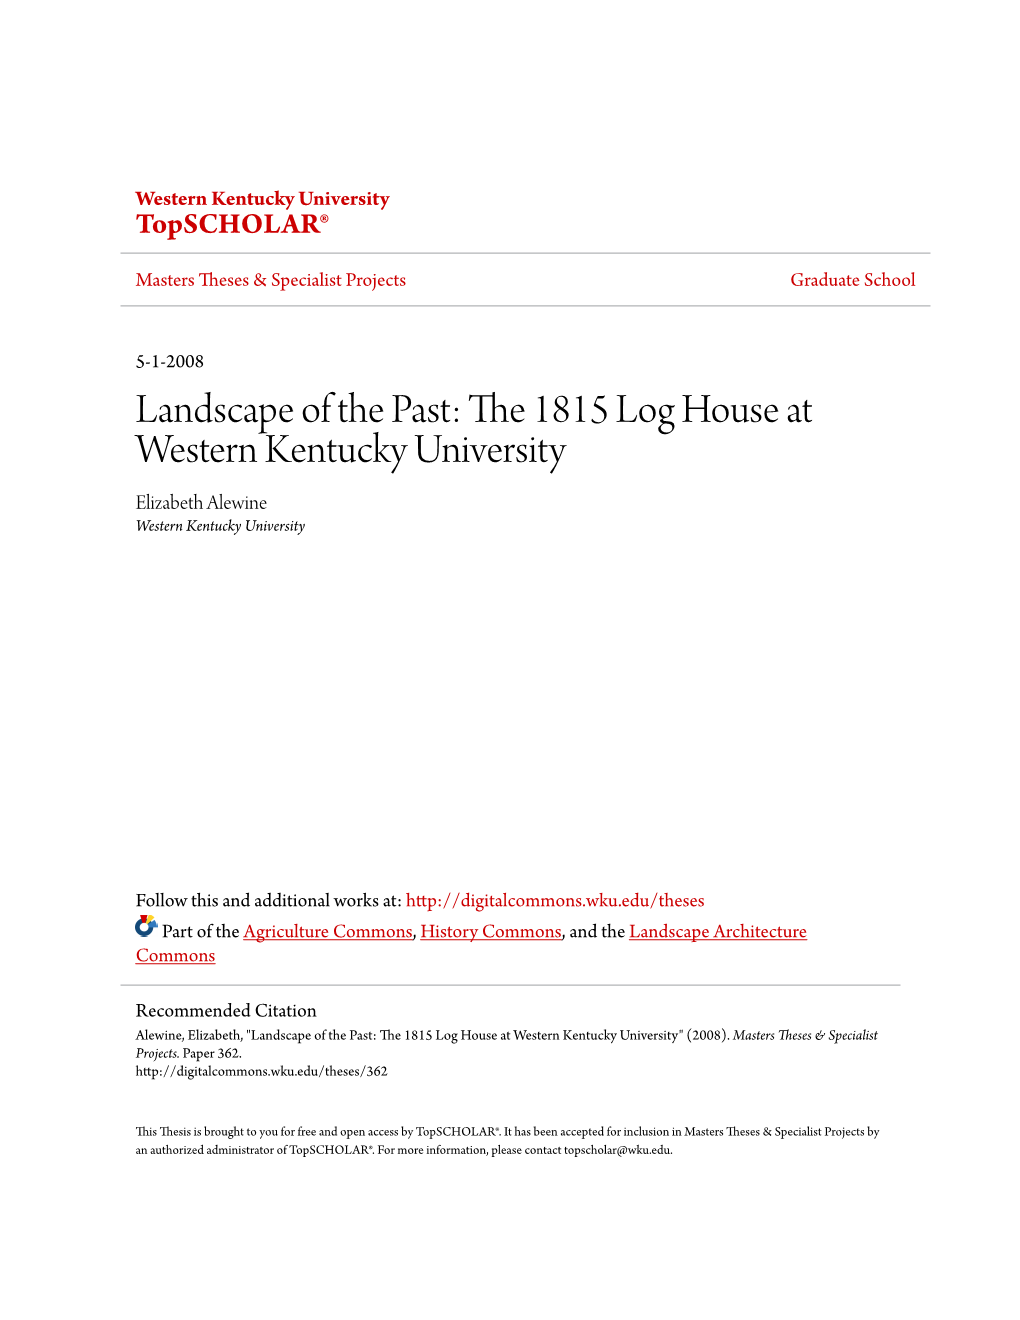 Landscape of the Past: the 1815 Log House at Western Kentucky University" (2008)